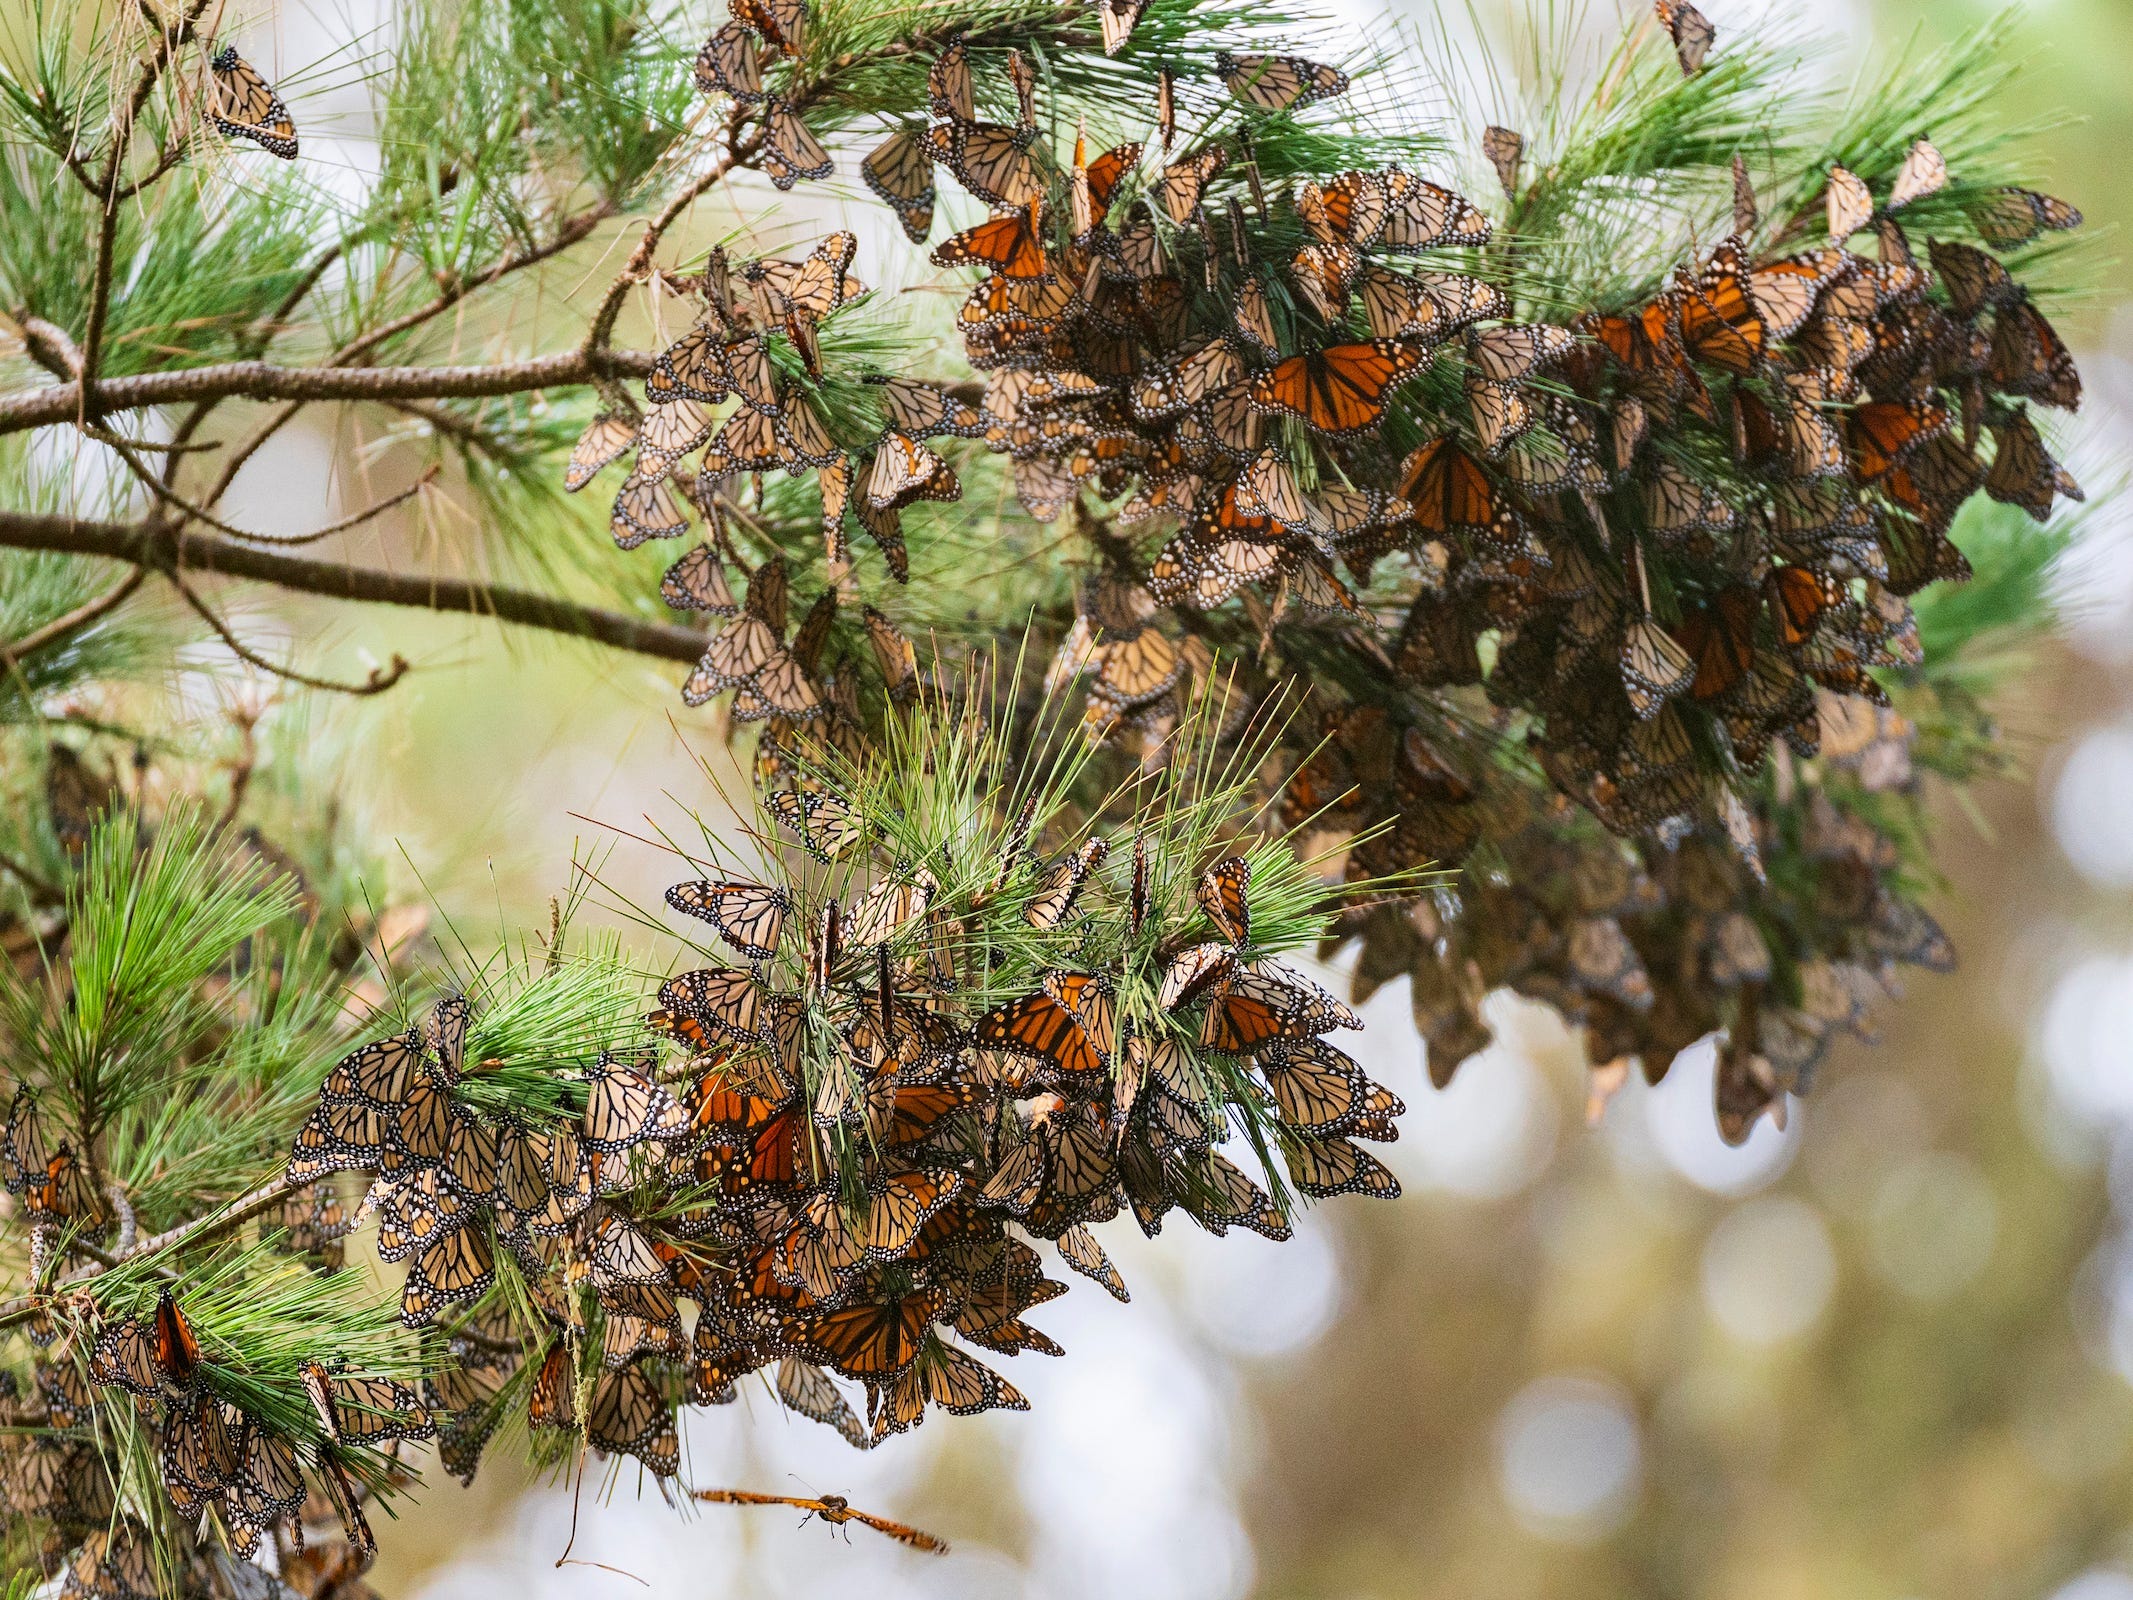 monarch butterflies flock covering pine branches